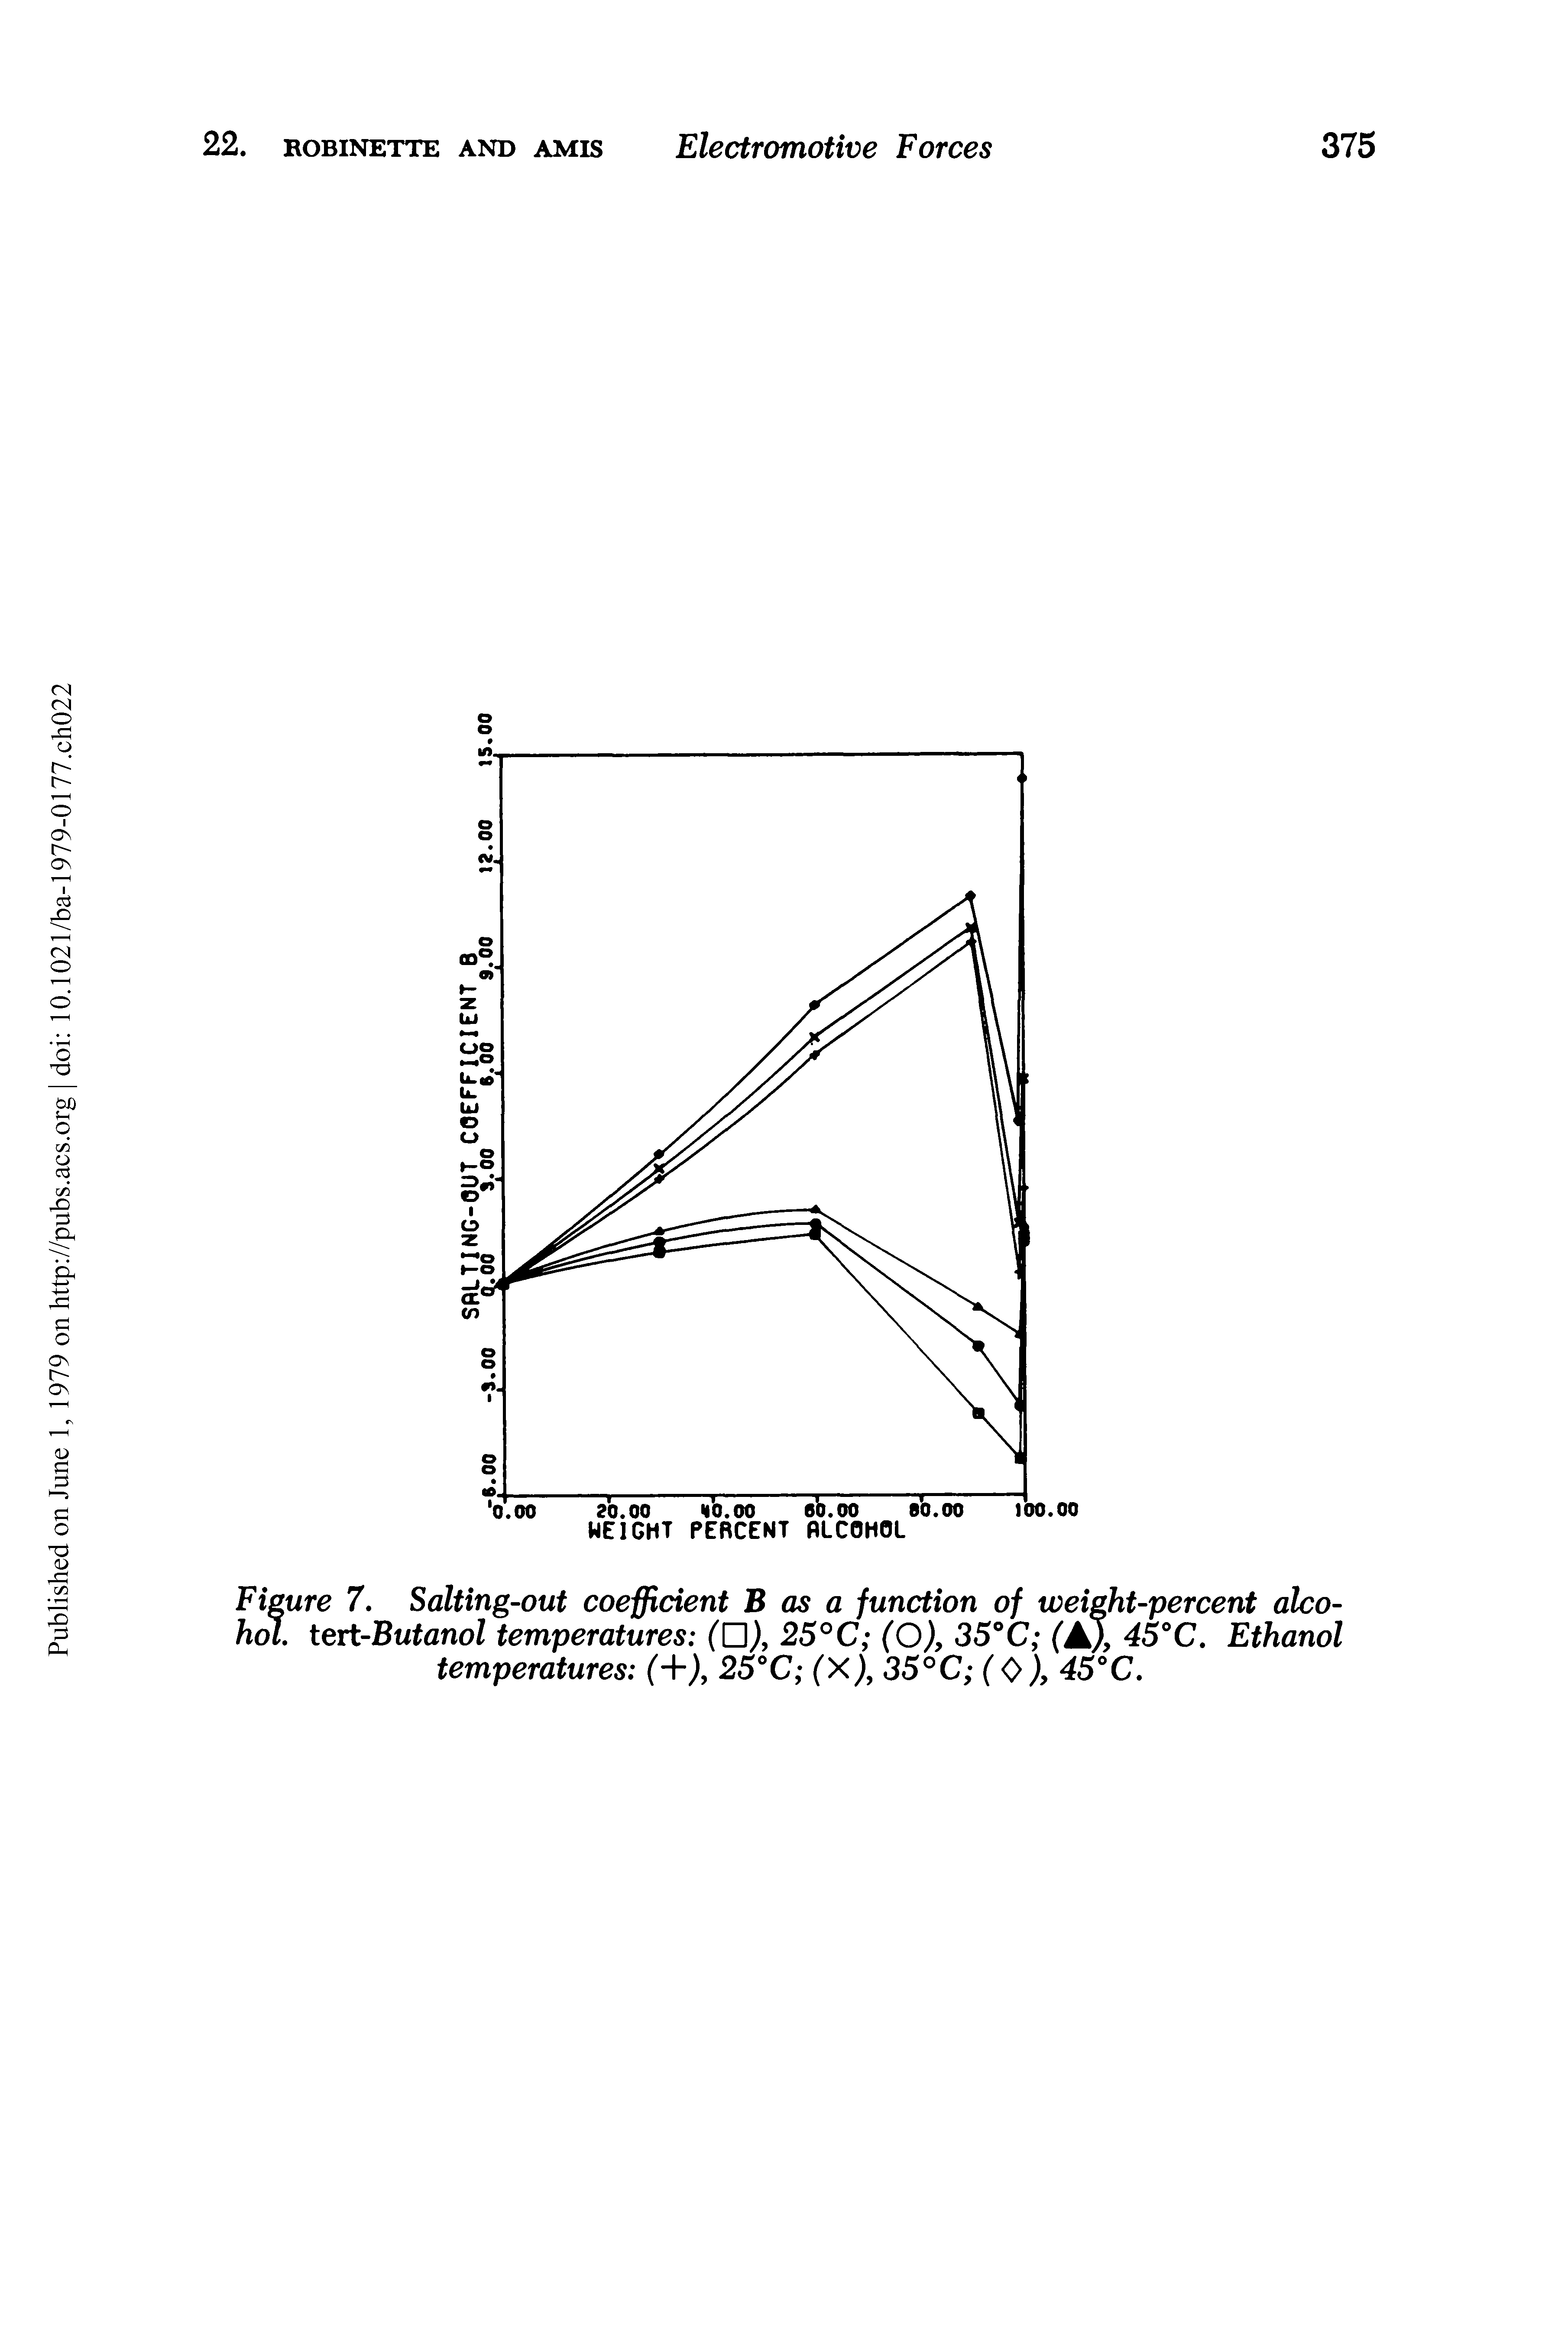 Figure 7. Salting-out coefficient B as a function of weight-percent alcohol tert-Butanol temperatures (D), 25°C (O), 35°C (A), 45°C. Ethanol temperatures (+), 25°C (X), 35°C (0 ), 45°C.